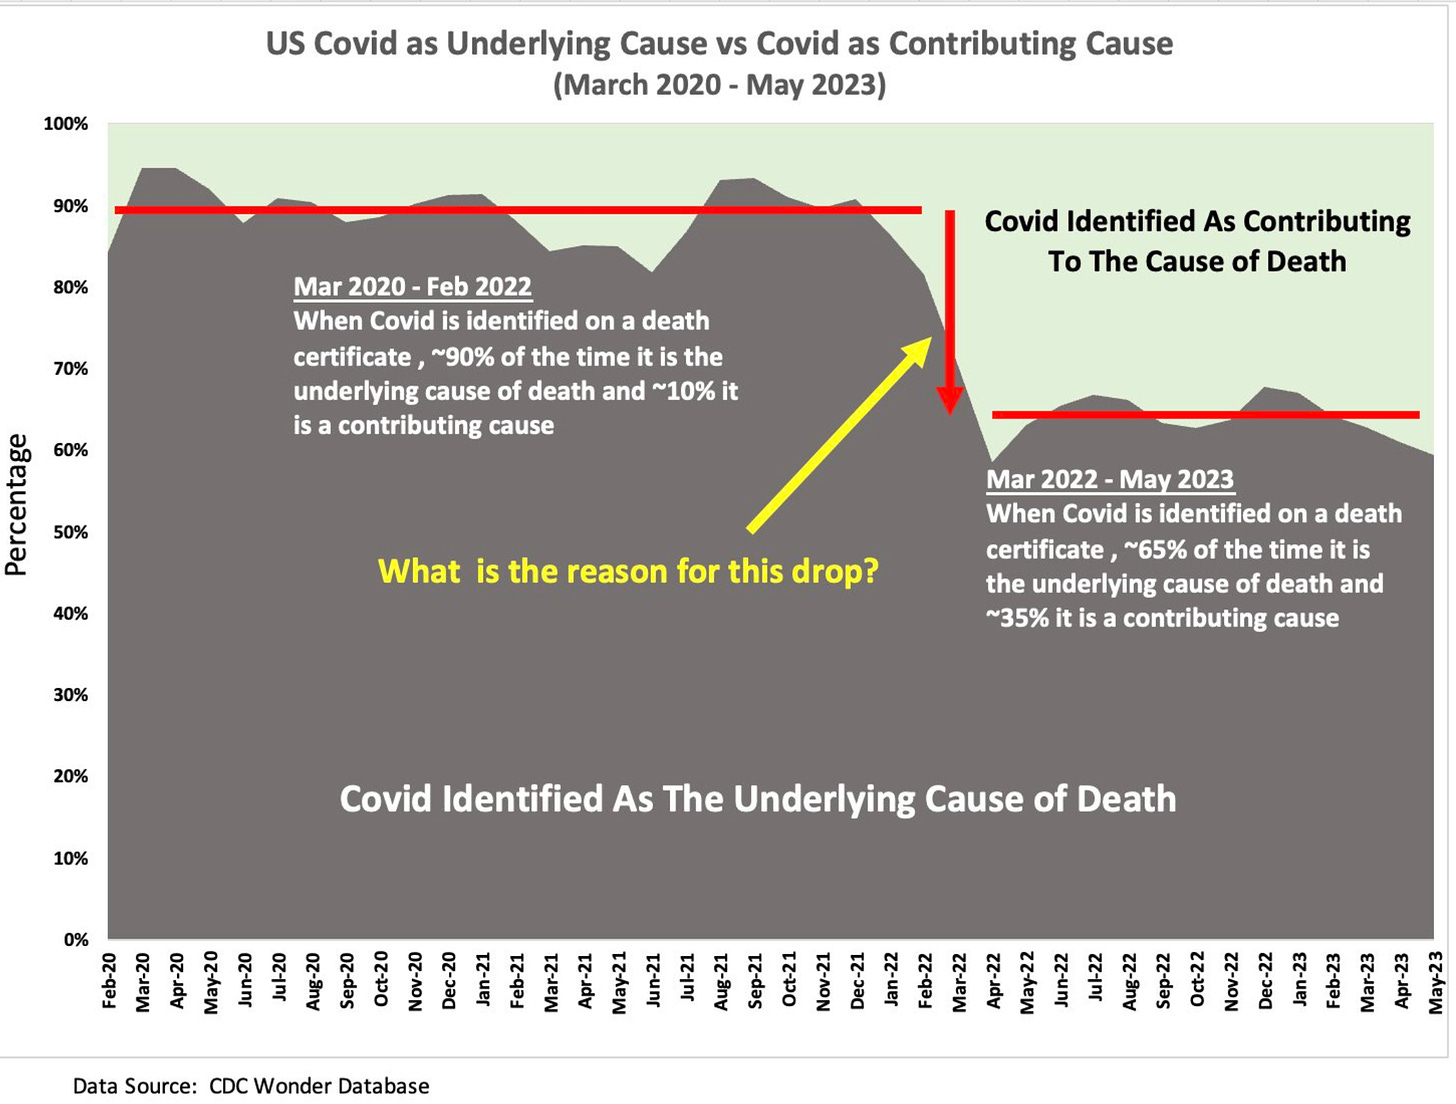 Why did COVID as a cause of death drop when CARES Act claims were expiring? Great planning?